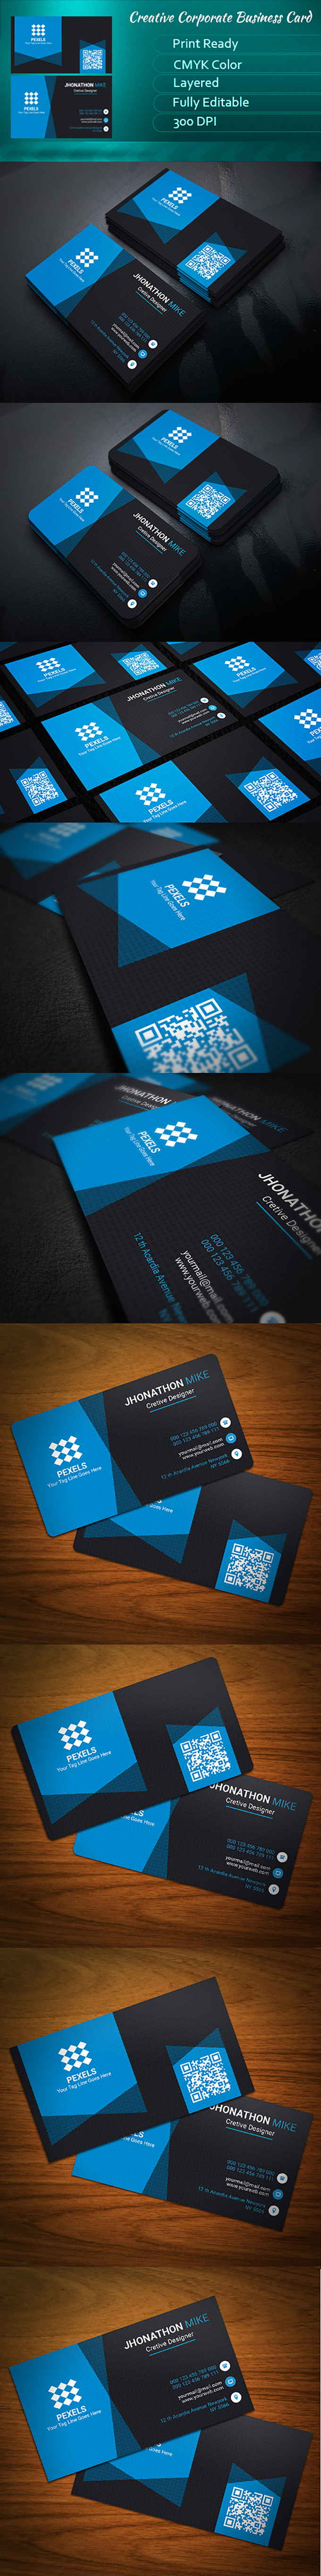 business card print ready example buy creative print cool awesome photoshop branding 